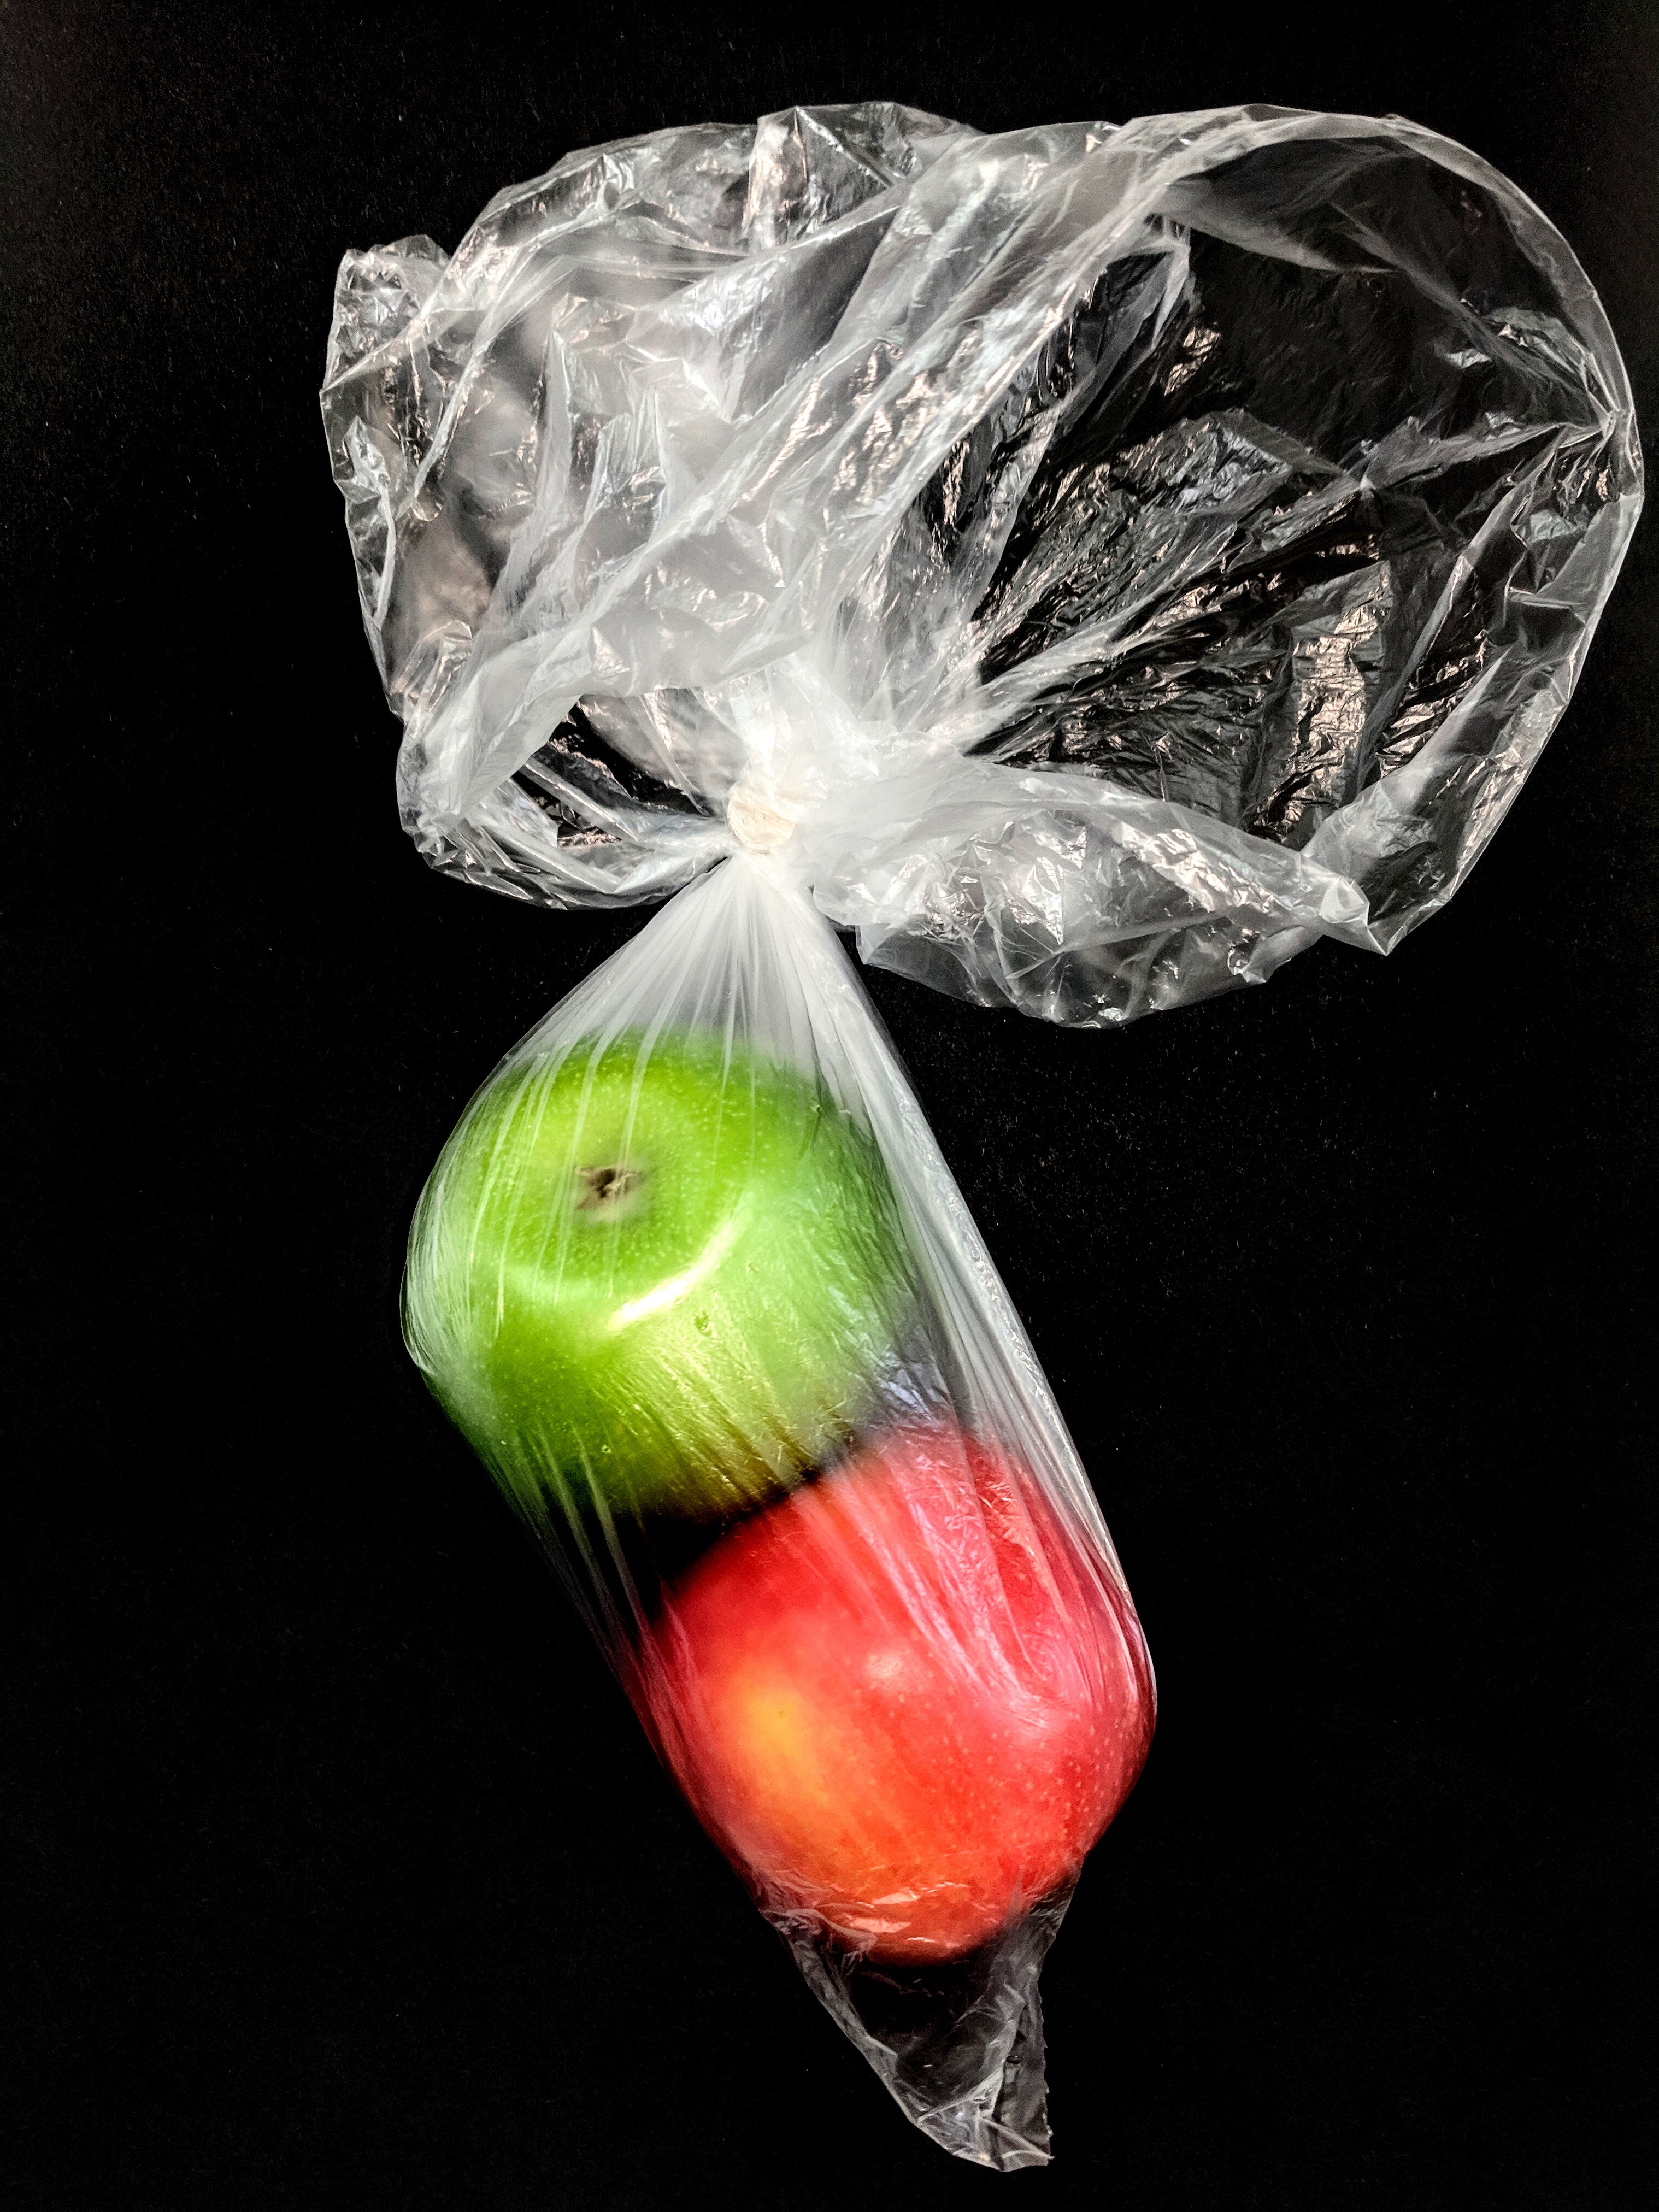 Two apples in a clear plastic bag